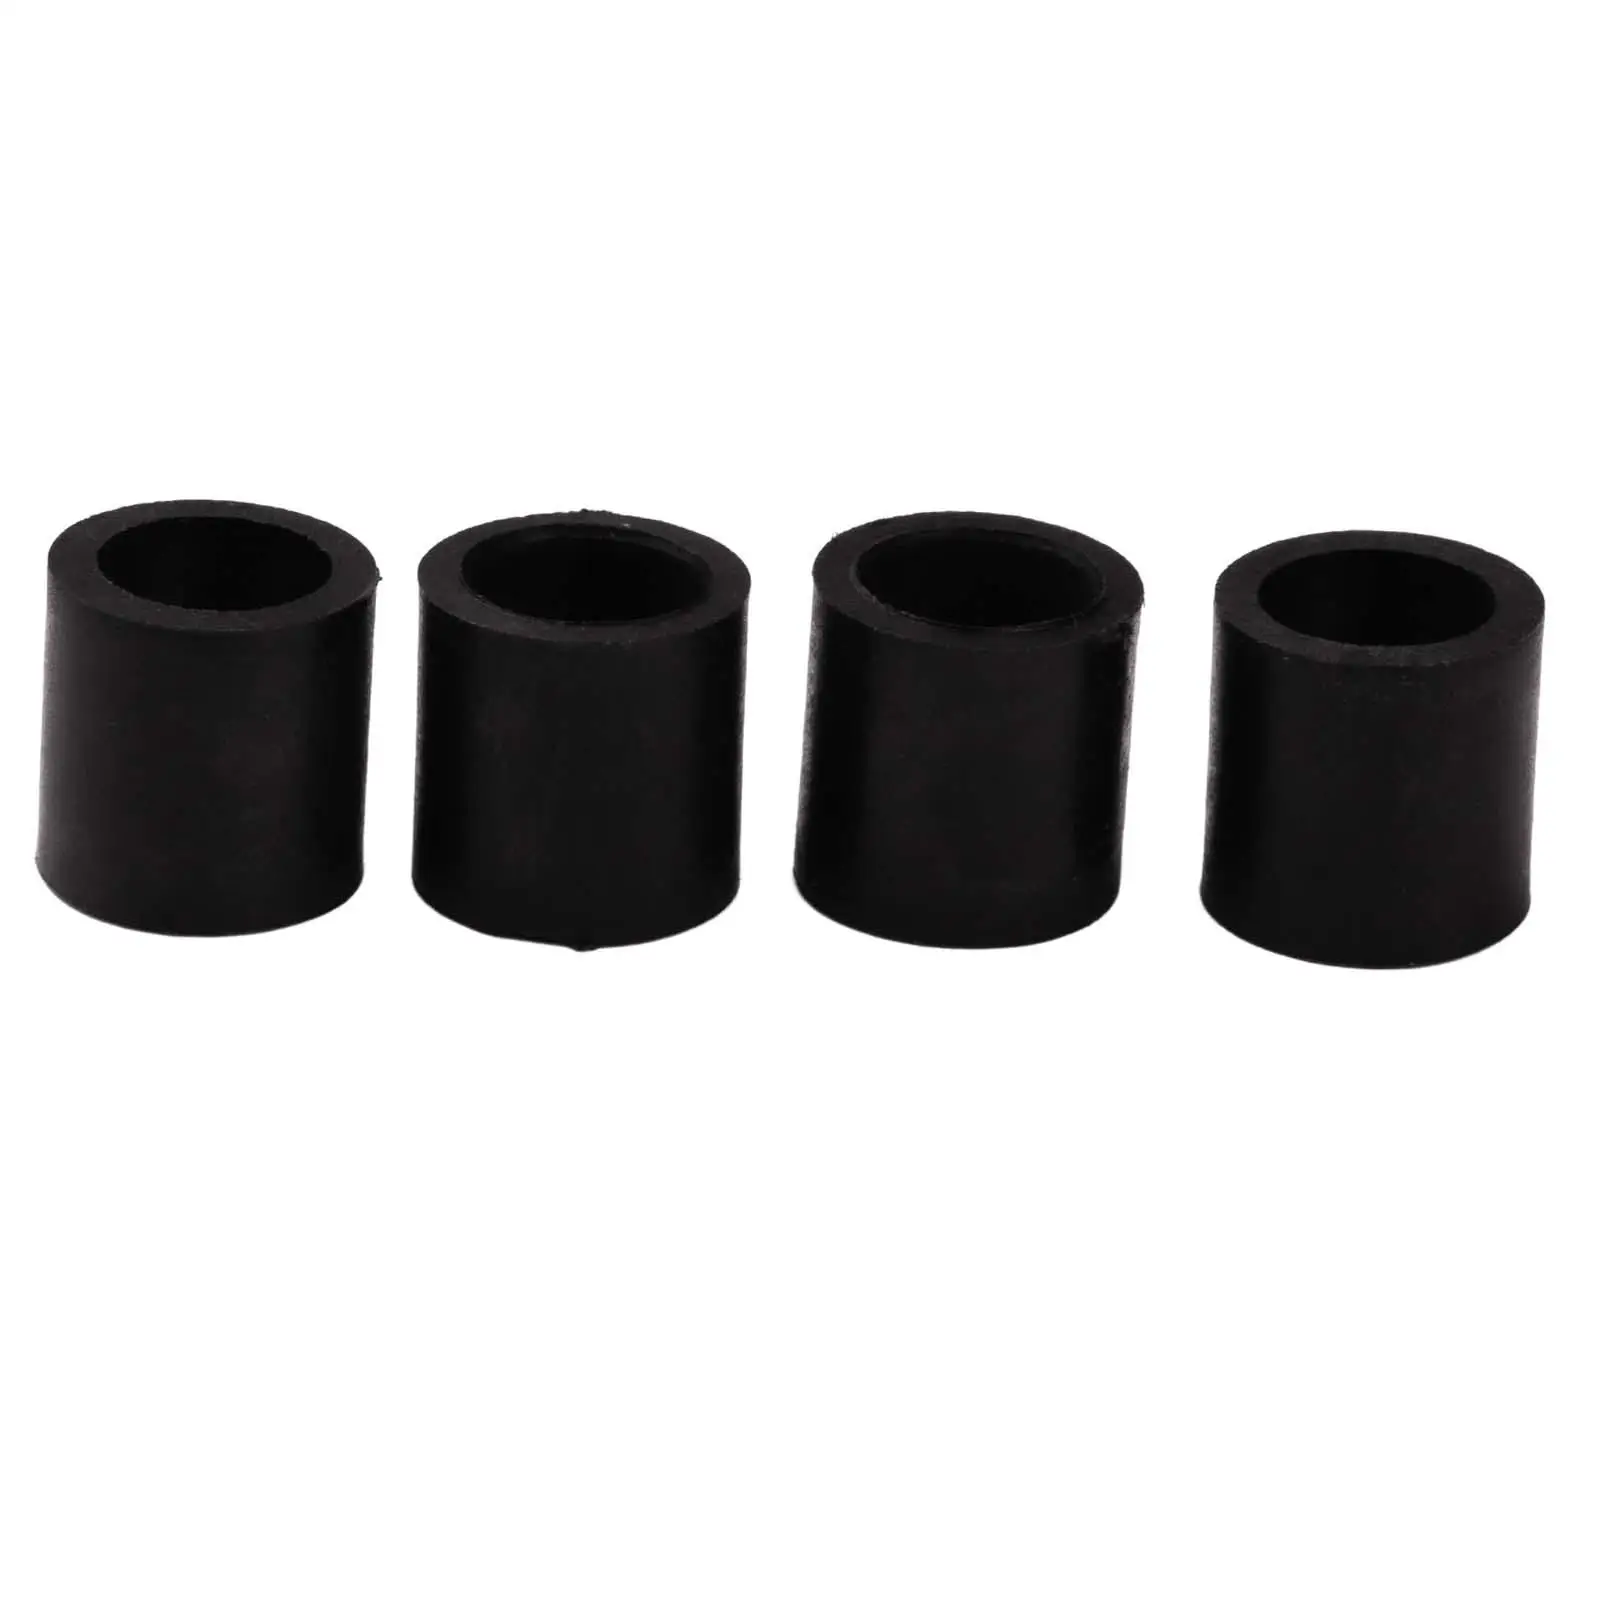 4x Replacement for Cricut Maker Easy Installation Durable for Cricut Roller Repair Rubber Roller/Wheel Rubber Roller Accessory